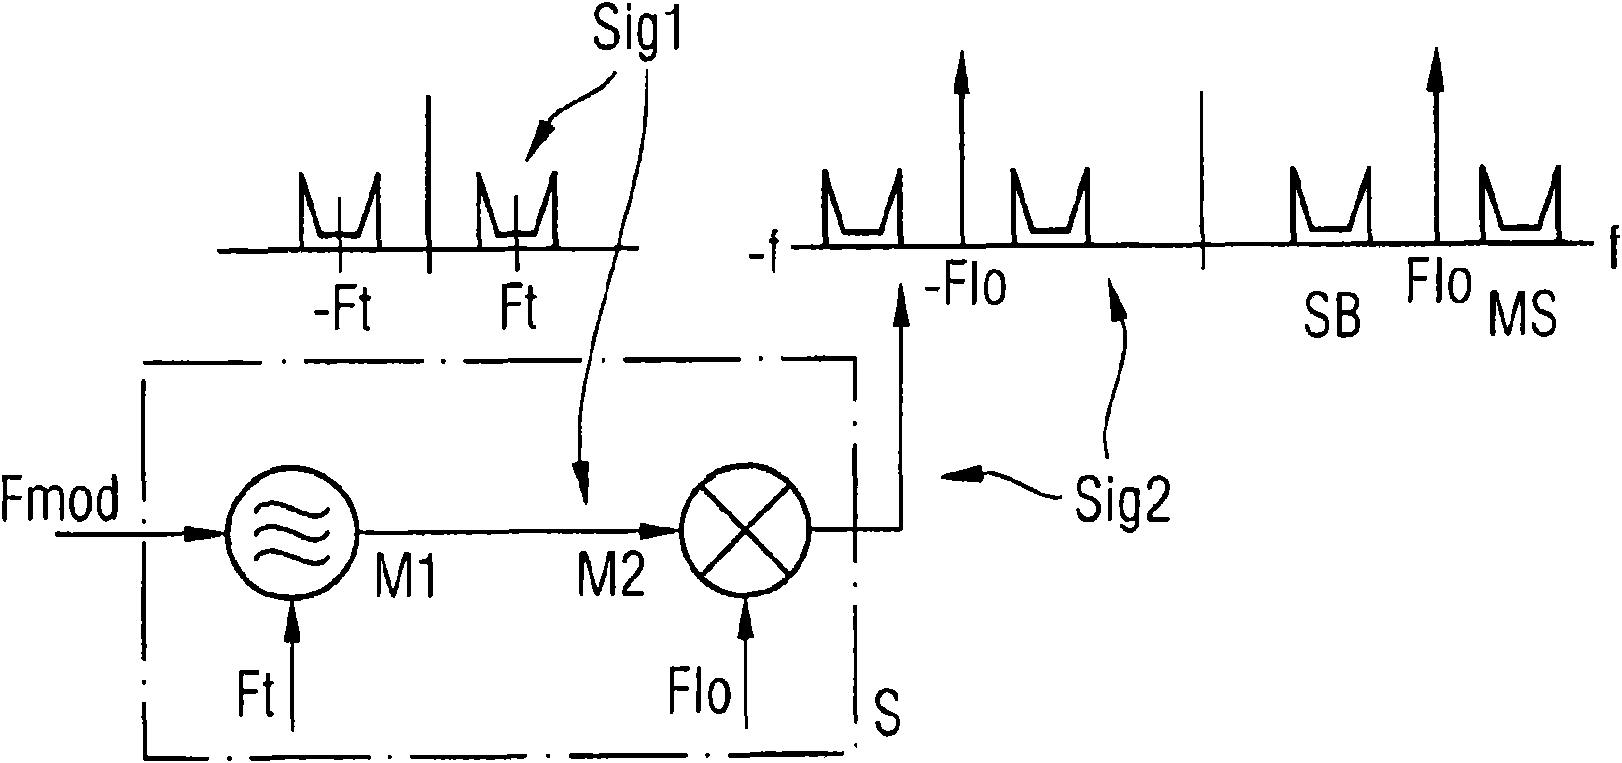 System for wireless communication